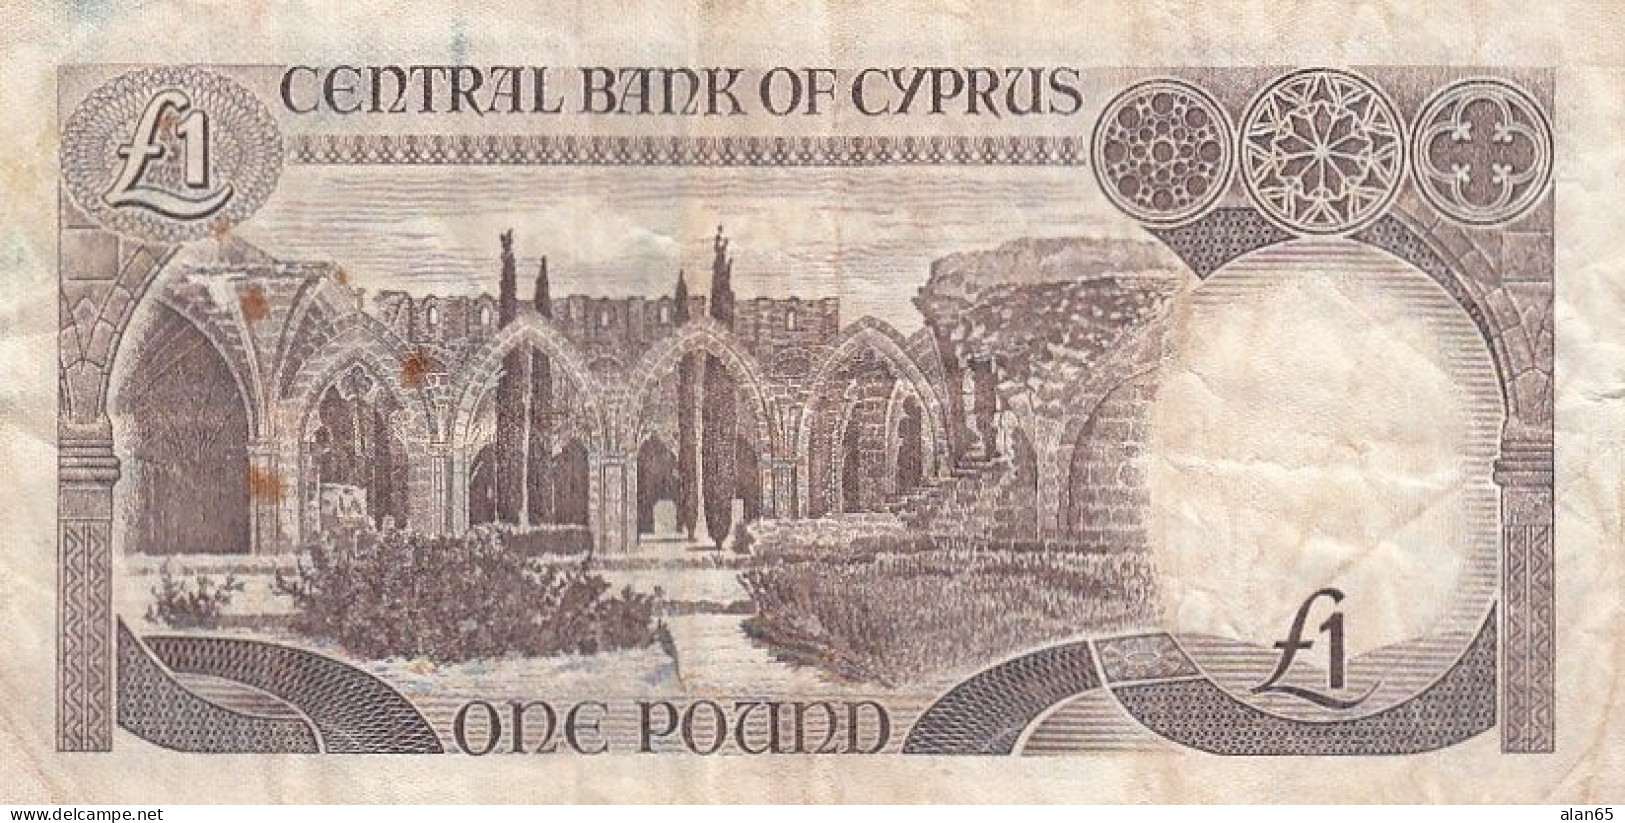 Cyprus #50, 1 Pounds 1982 Banknote - Cyprus